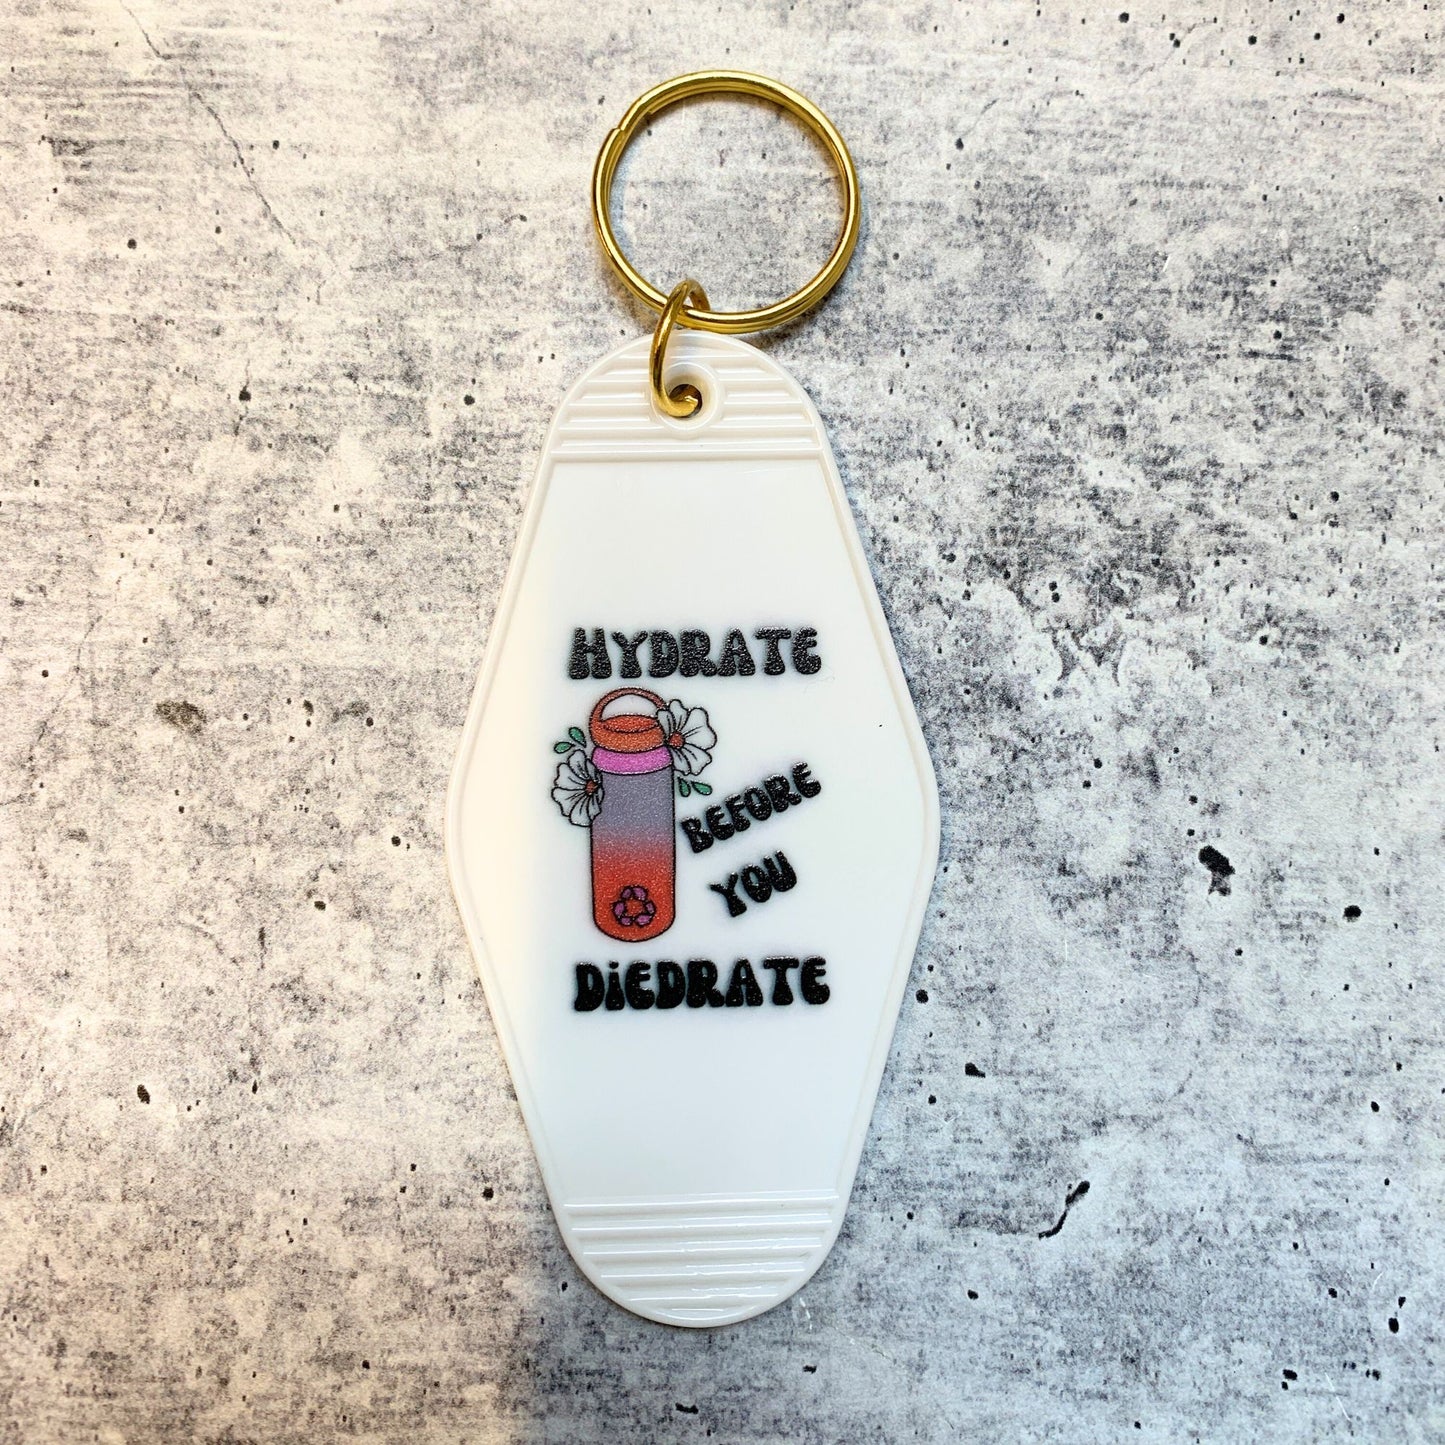 Hydrate Before You Diedrate 💧 Motel Style Keychain